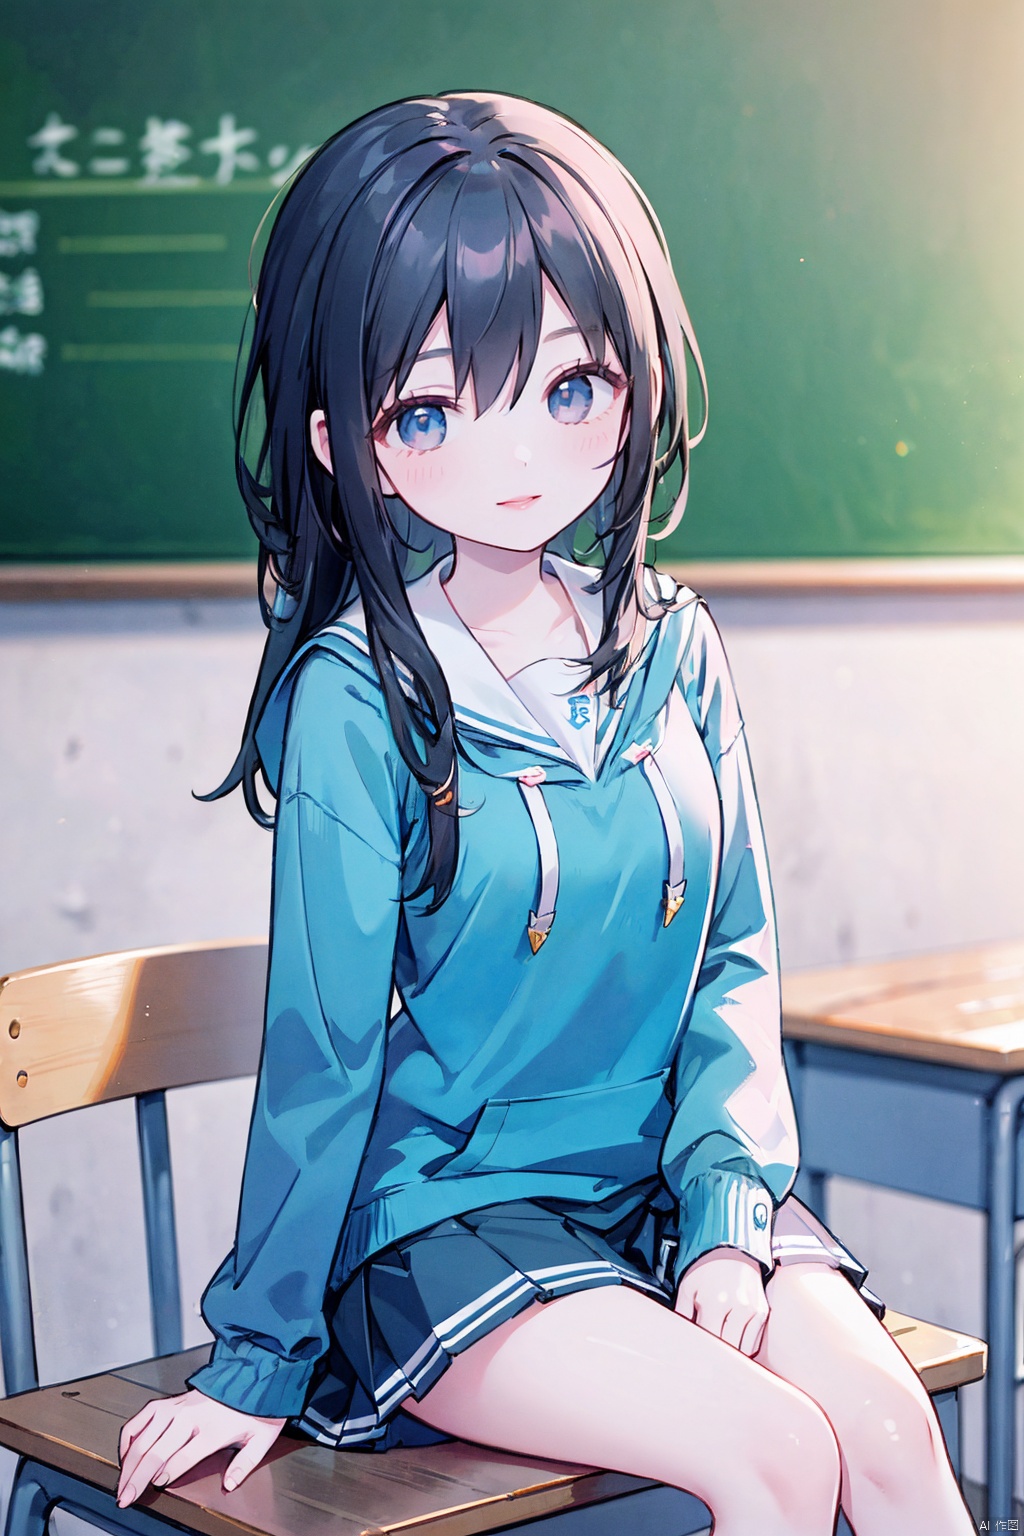  1 girl, Asian, long black hair, fuzzy, fuzzy background, color difference, depth of field, blue and white school uniform, hoodie, lips, long sleeves, looking at the audience, photo (center) , real, sitting in the classroom, blackboard, desk, book, Smile, Solo, solo, 1girl,moyou